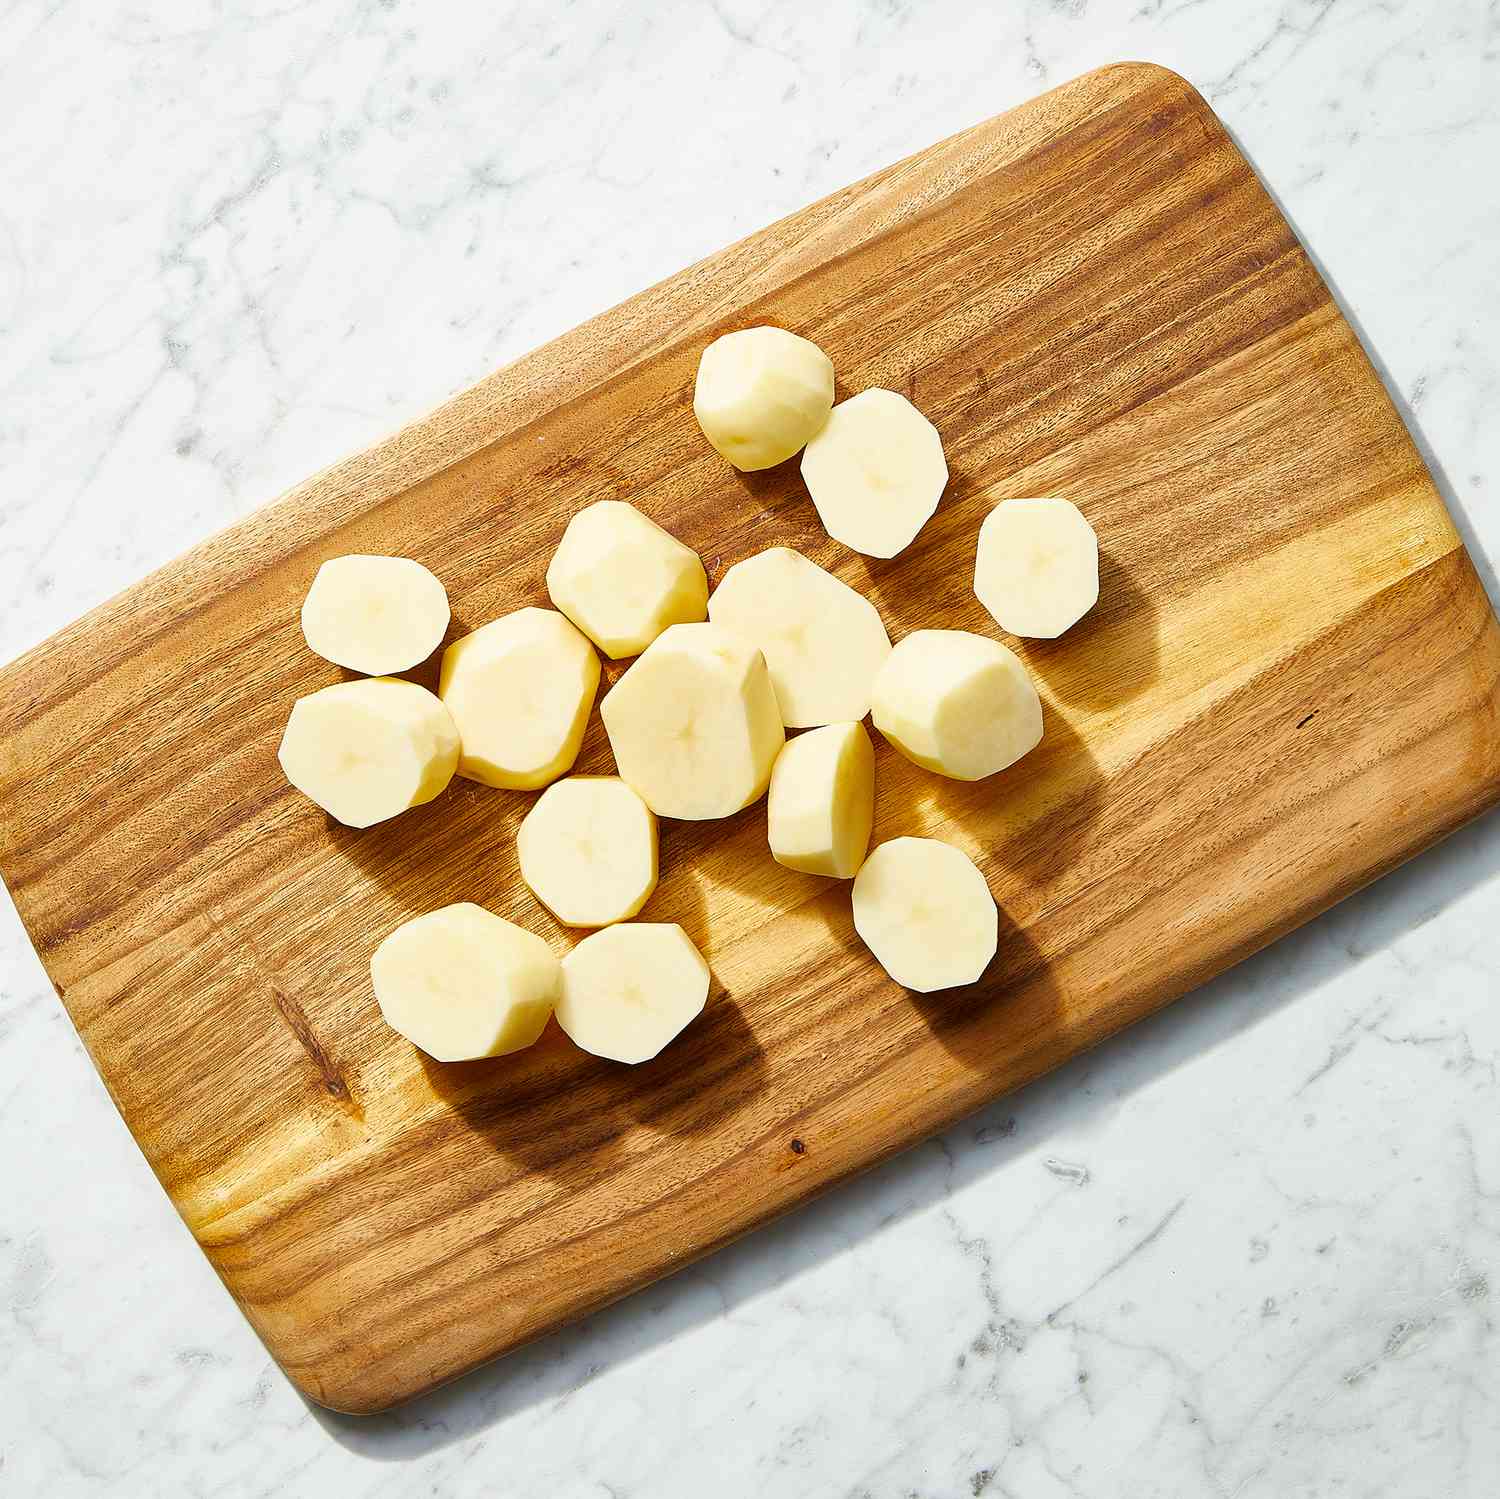 potato slices on a wood cutting board